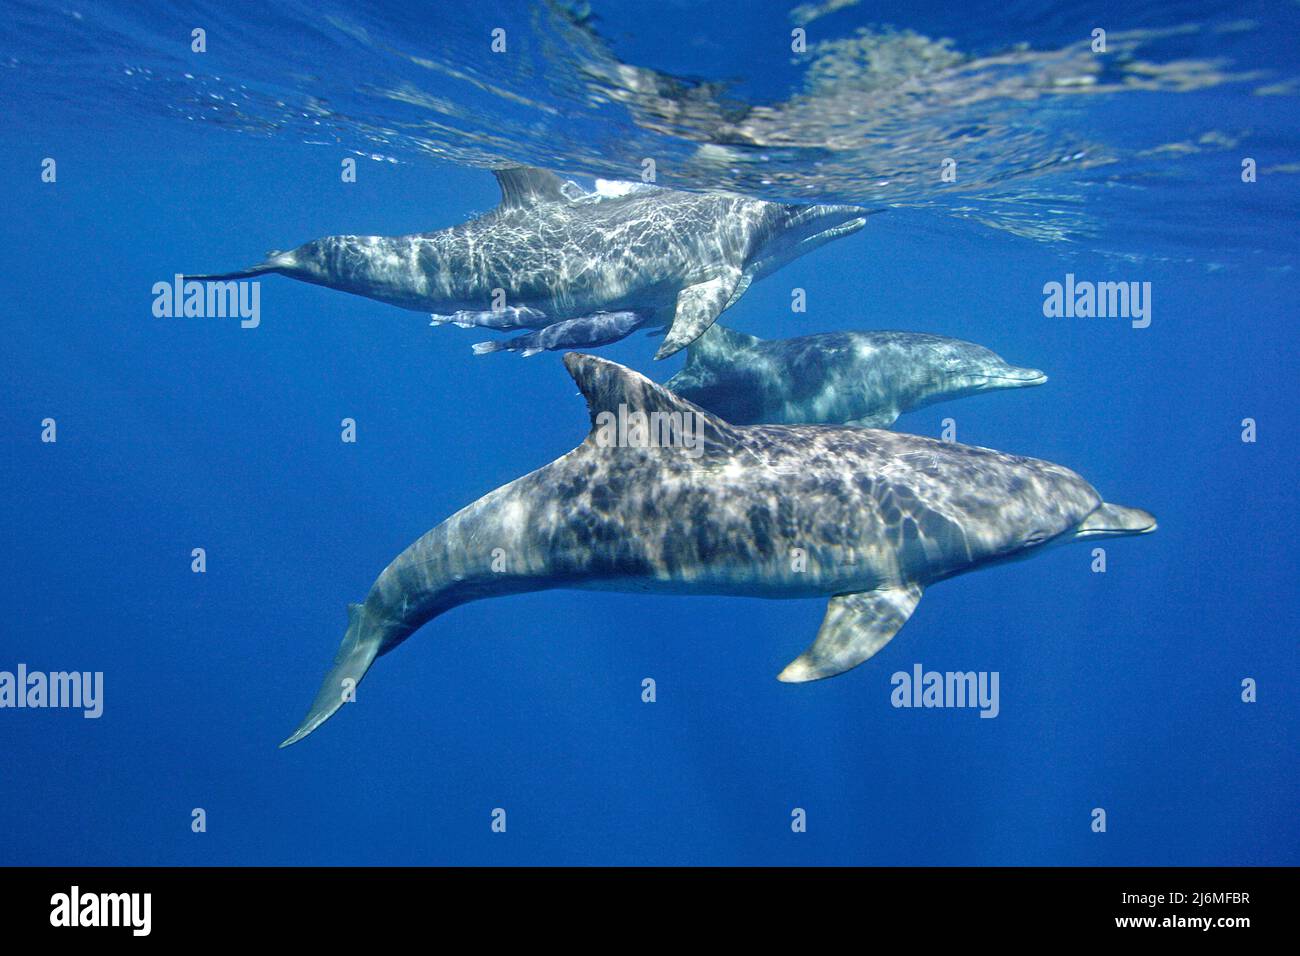 Indo-Pacific bottlenose dolphin (Tursiops aduncus), in blue water, Maldives, Indian Ocean, Asia Stock Photo